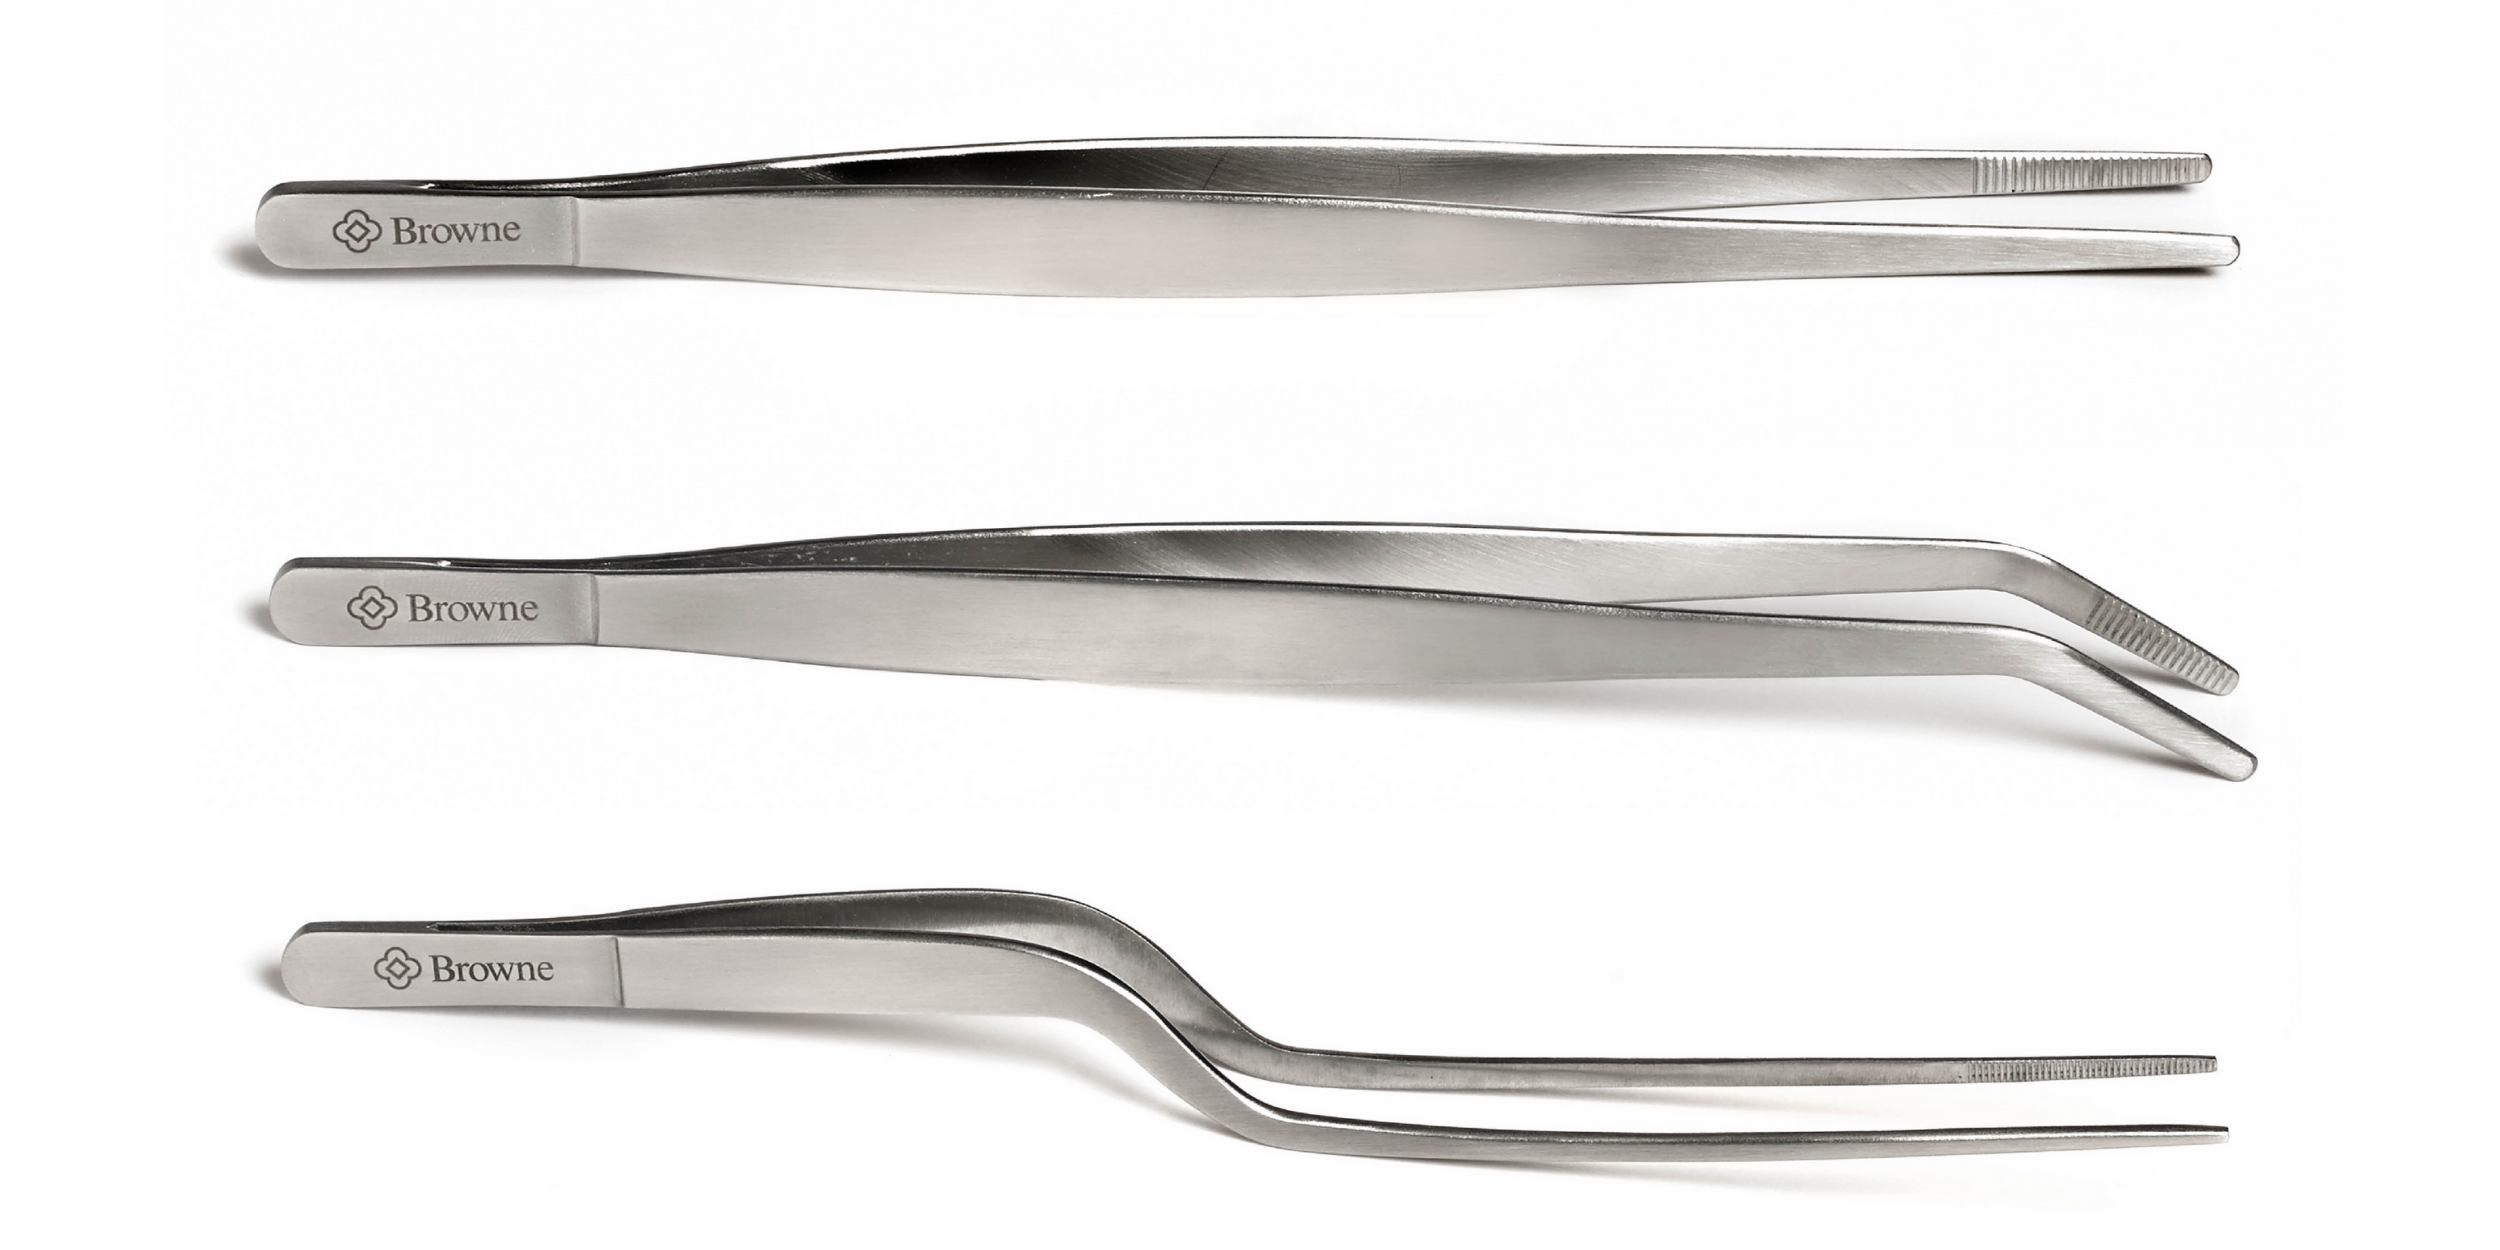 Precision tongs/tweezers. Straight, curved and offset design